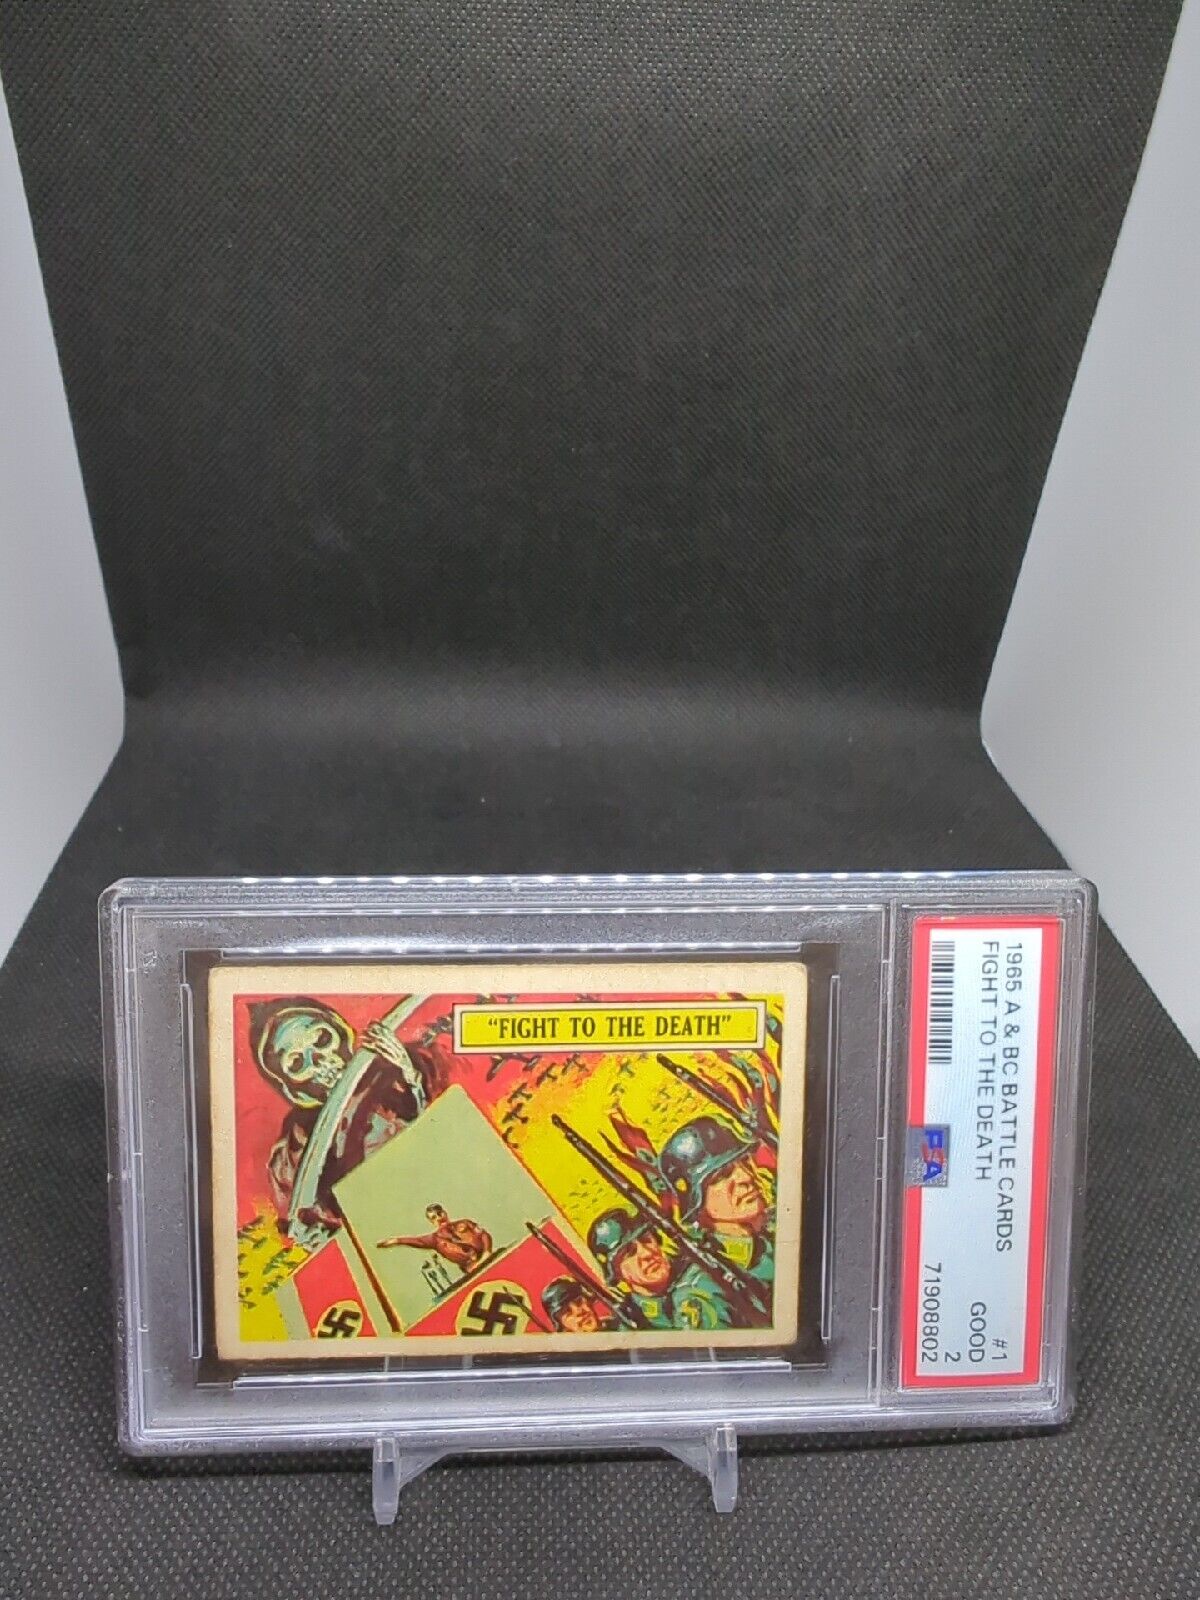 1965 A&BC Topps Battle Cards #1 Fight To The Death PSA 2